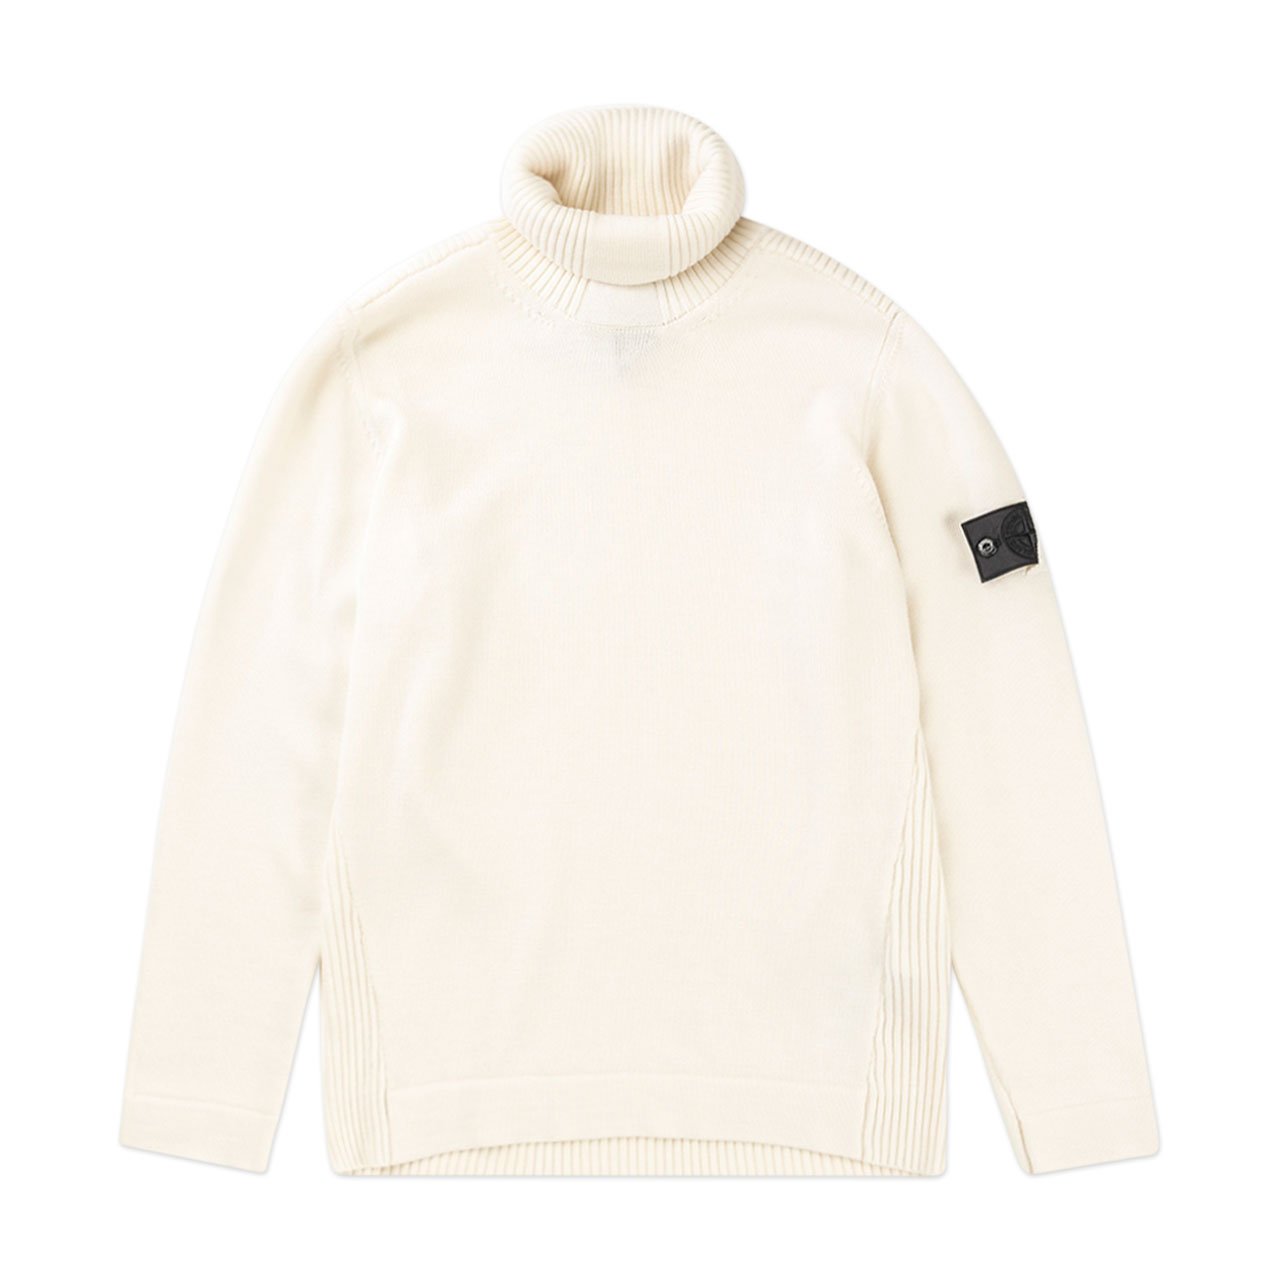 stone island shadow project ribbed turtle neck (white) - 7319510a5.v0099 - a.plus - Image - 1